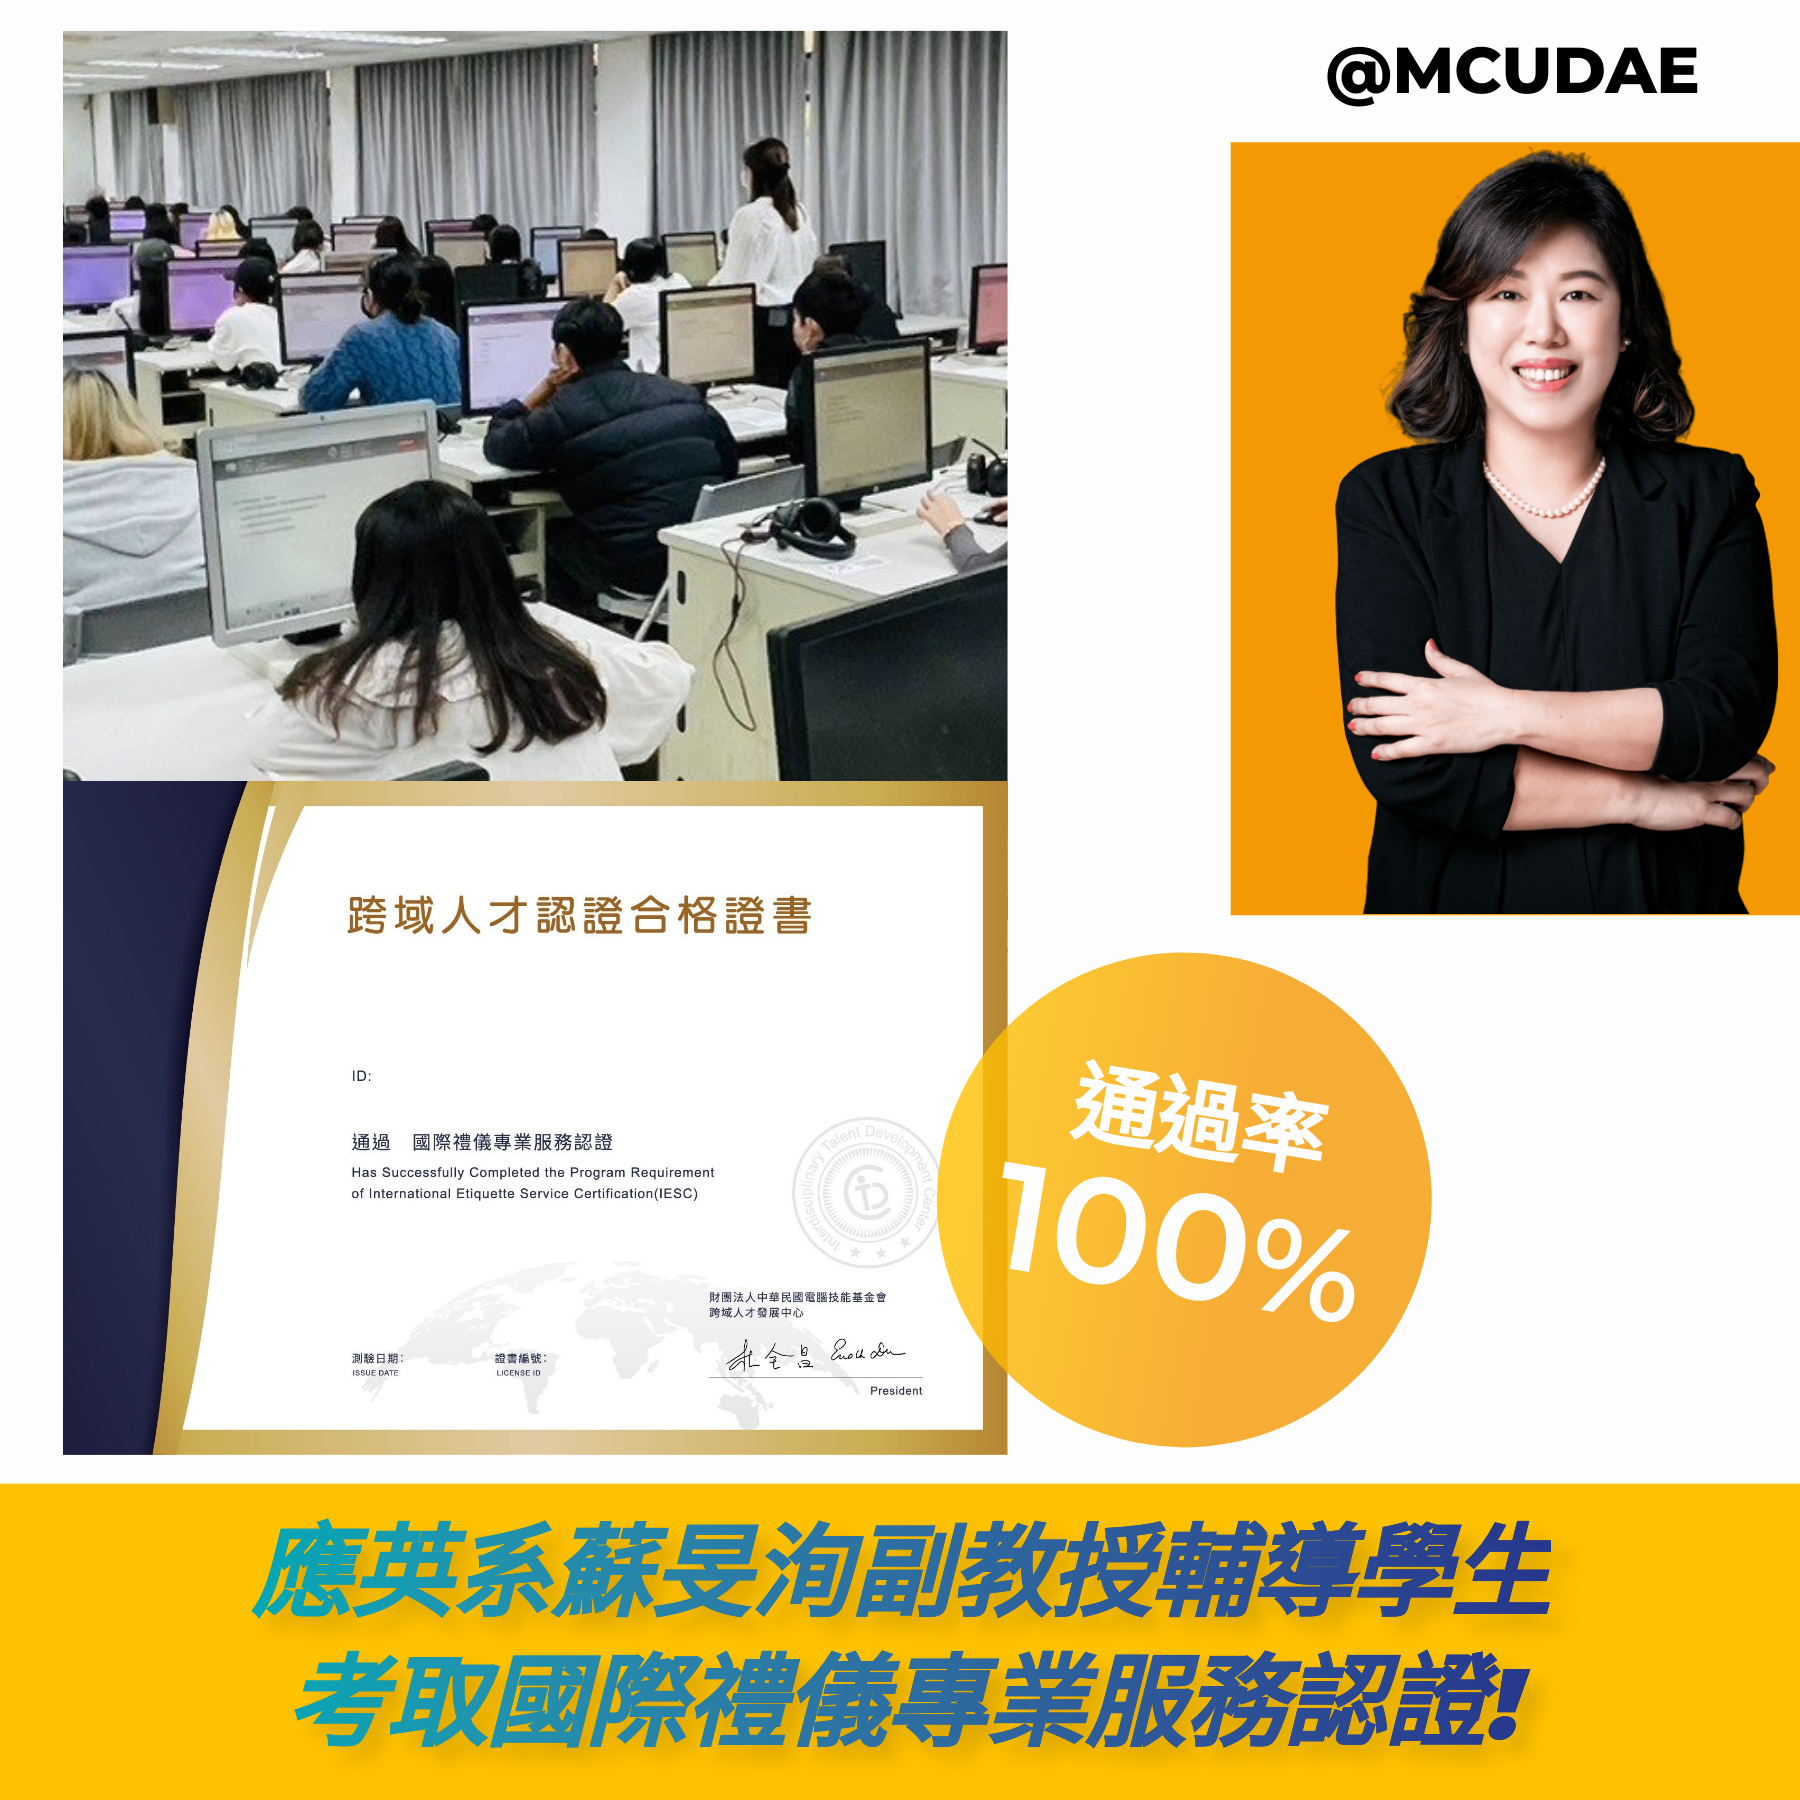 Featured image for “58 students from the Department of Applied English at Ming Chuan University successfully obtained the International Professional Etiquette Service Certification, achieving a 100% pass rate.”